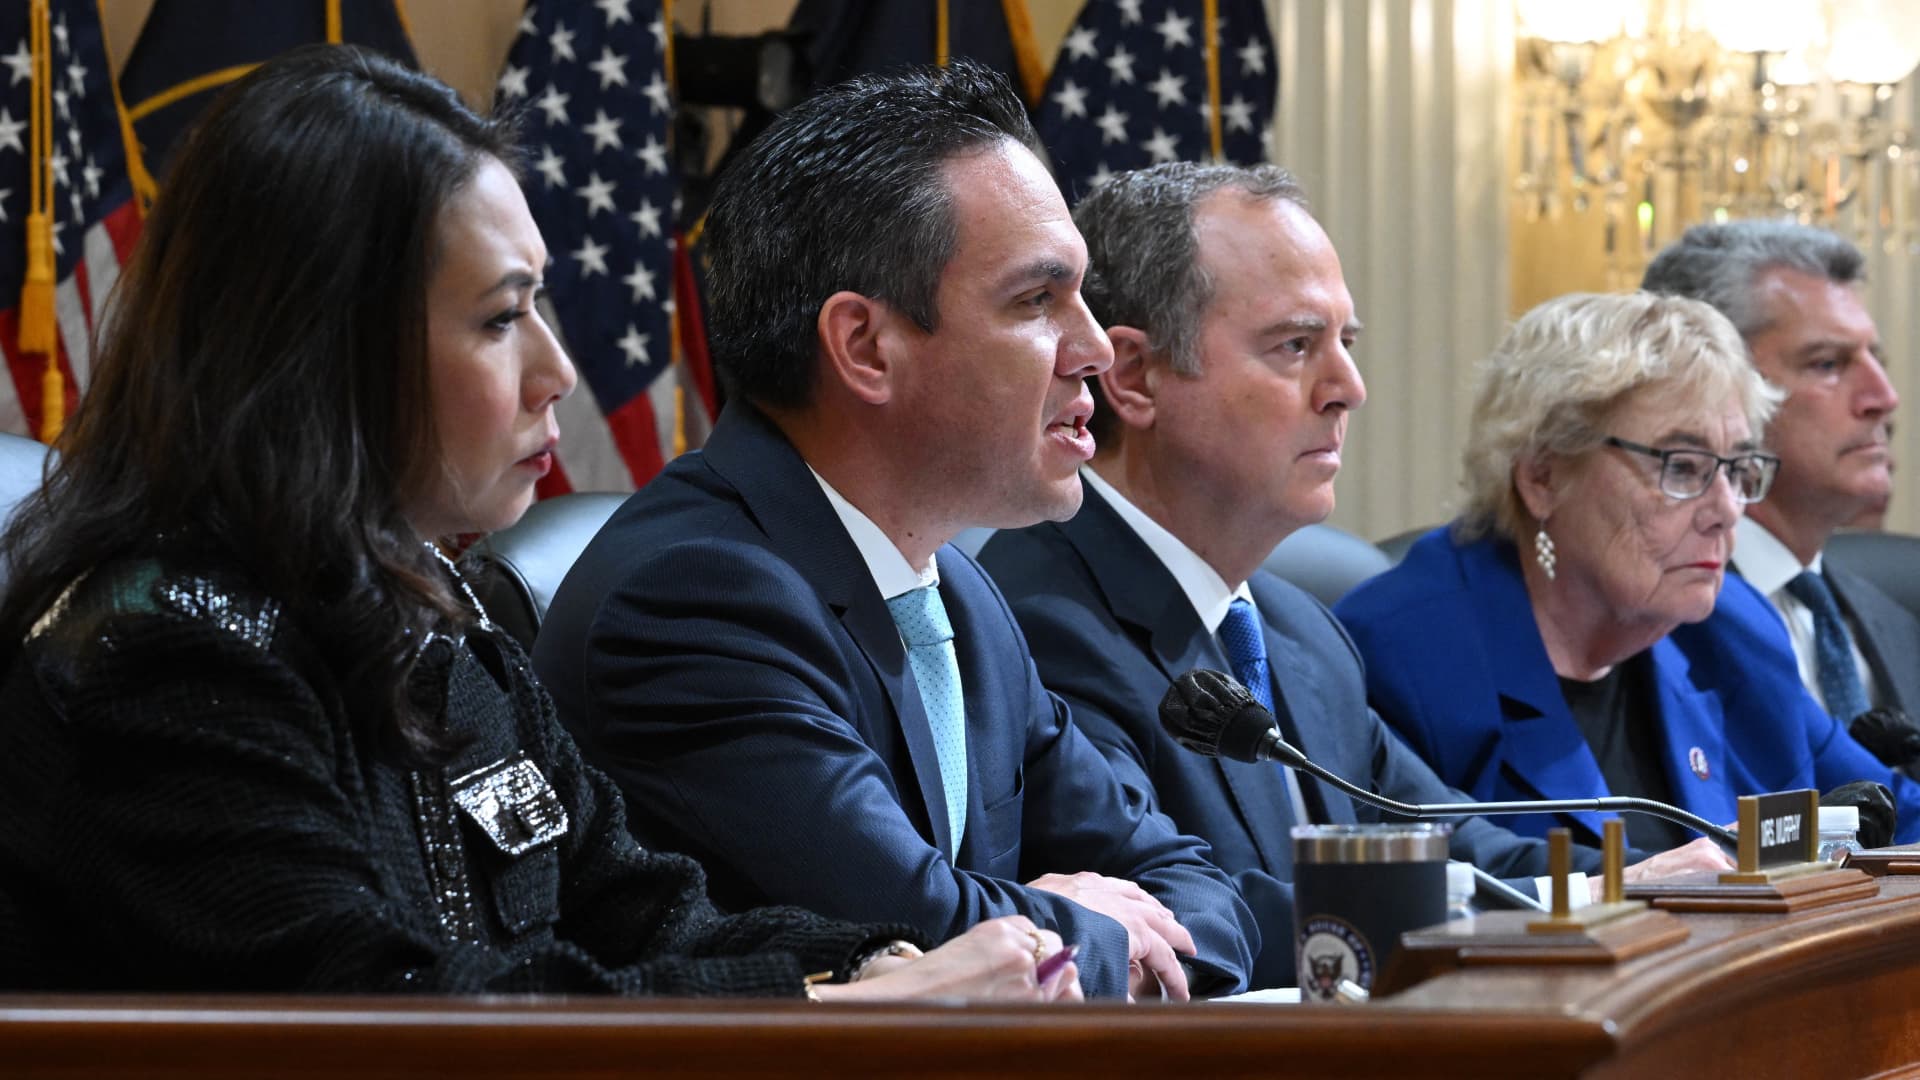 Committee member, US Representative Pete Aguilar (2nd from left), Democrat of California, speaks during a US House Select Committee hearing to Investigate the January 6 Attack on the US Capitol, on Capitol Hill in Washington, DC, on October 13, 2022.